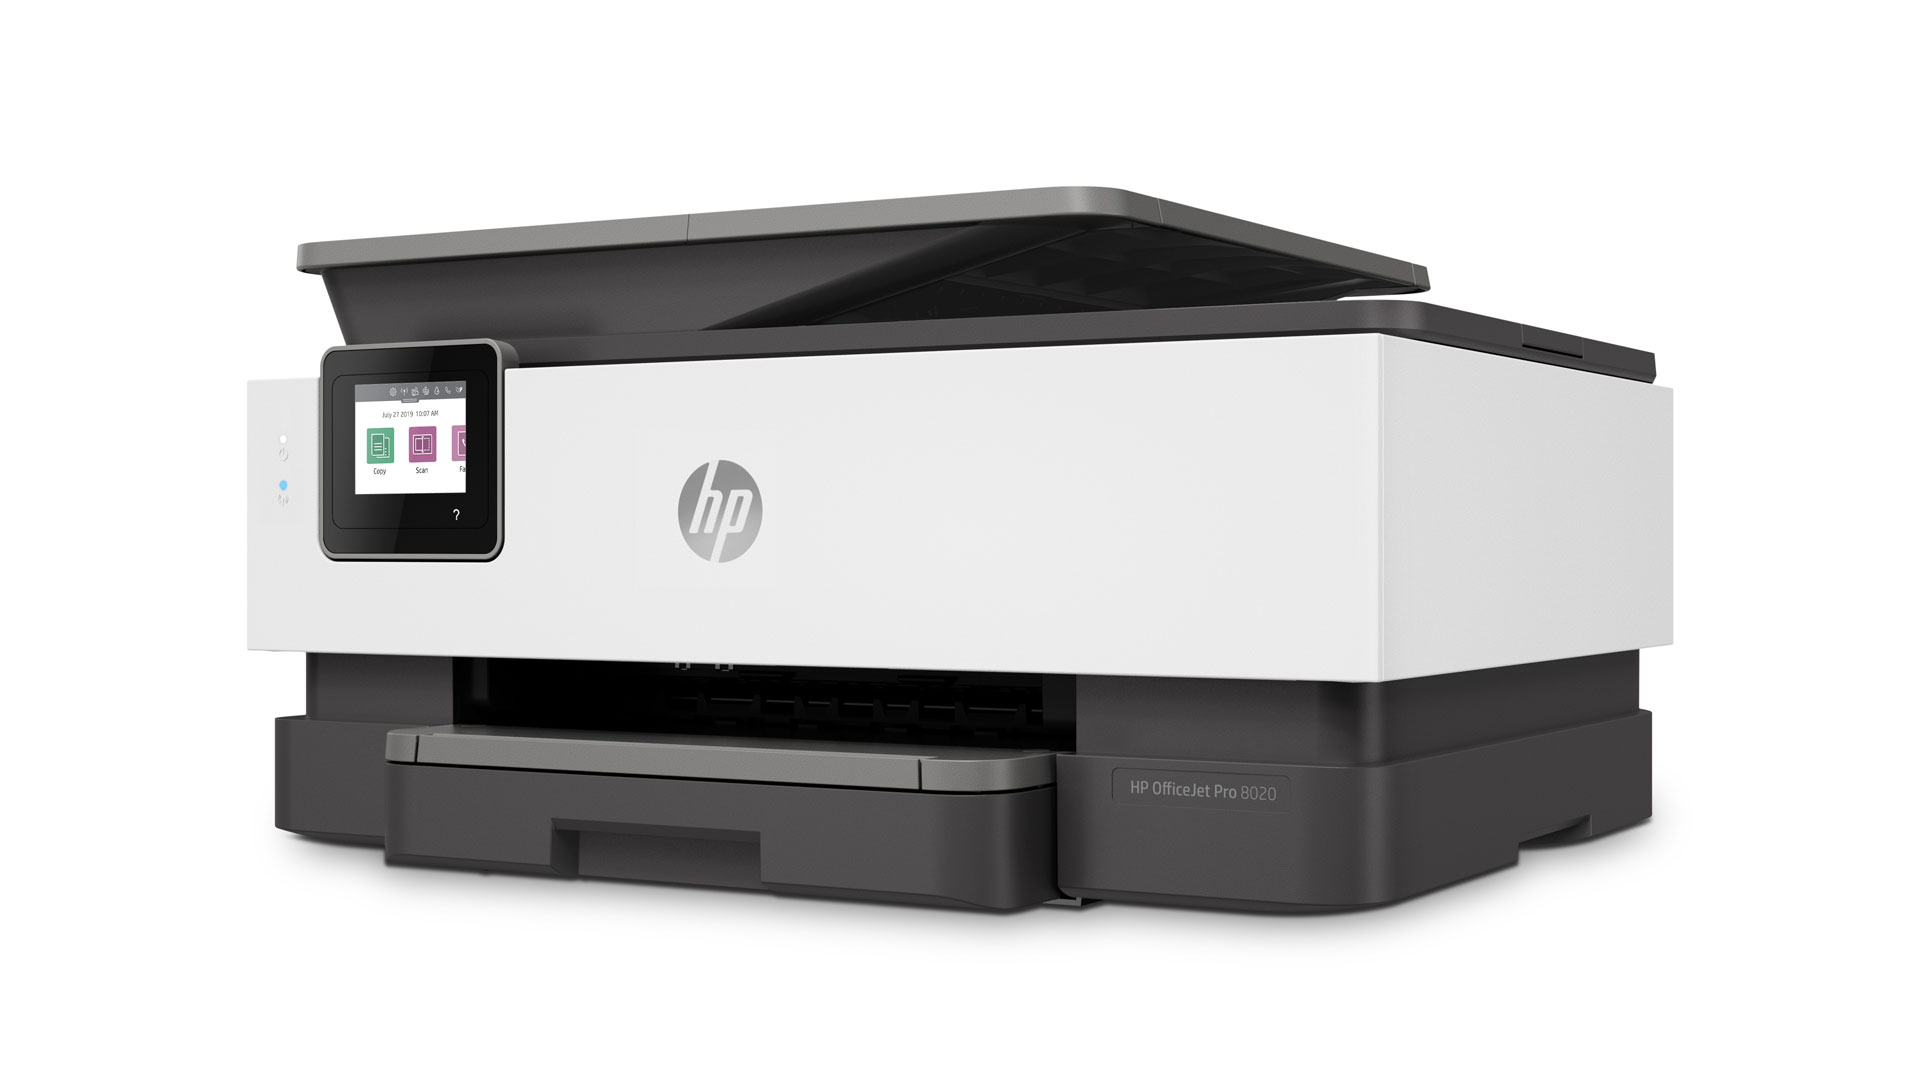 HP's OfficeJet Pro range includes the amazingly-affordable 8020, which carries an RRP of just AU$199.